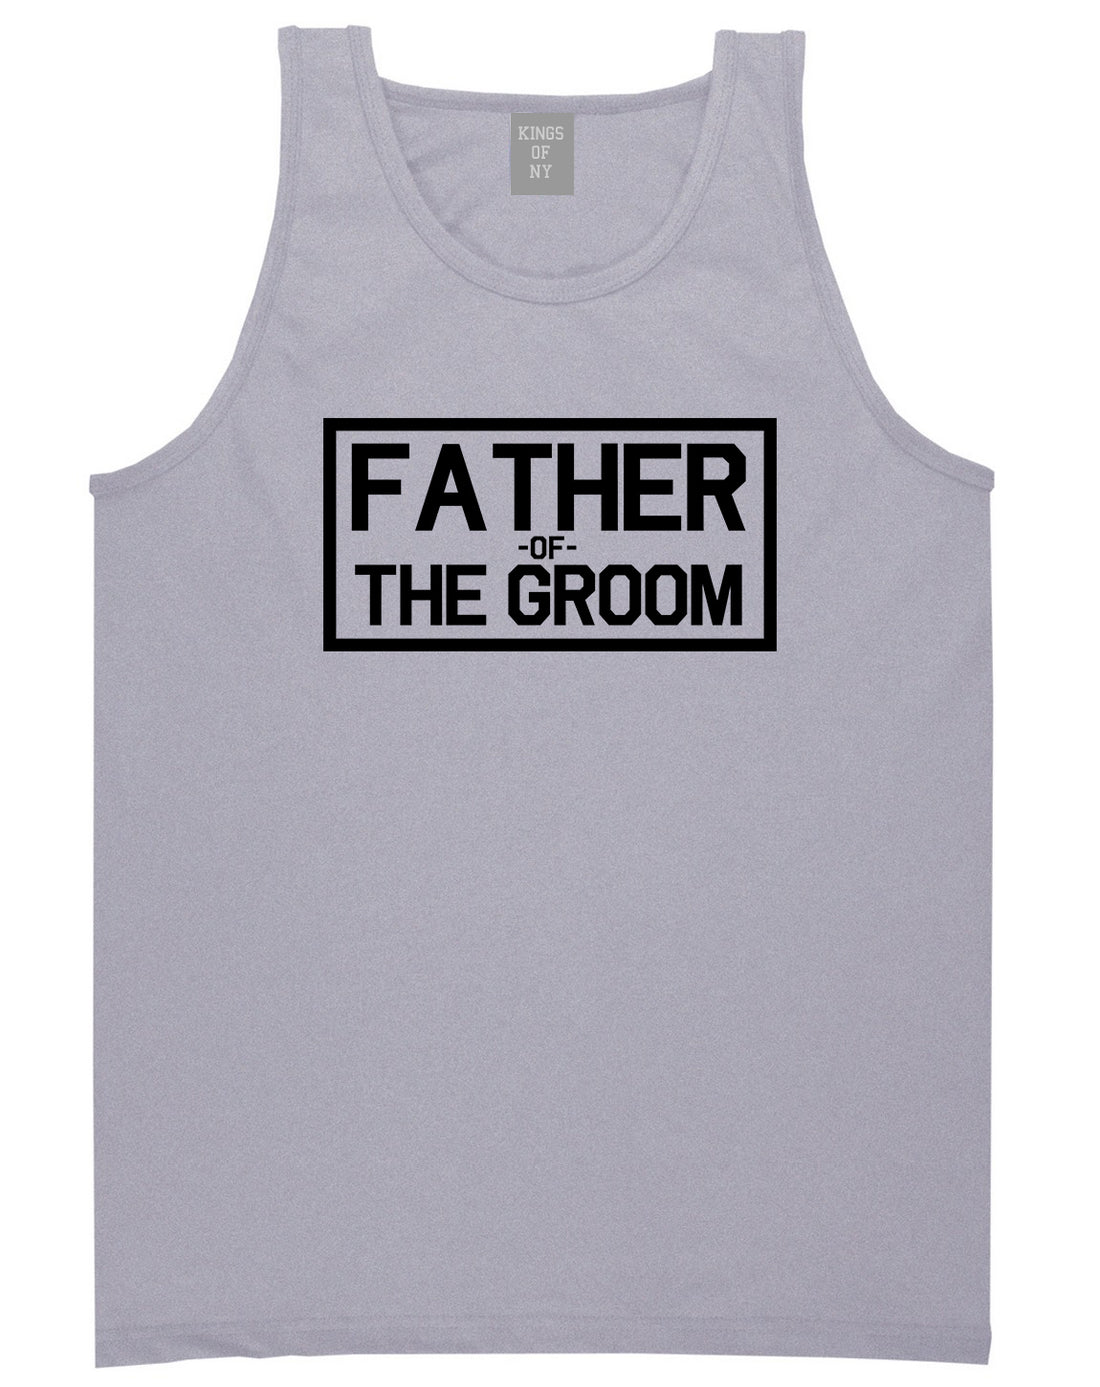 Father_Of_The_Groom Mens Grey Tank Top Shirt by Kings Of NY